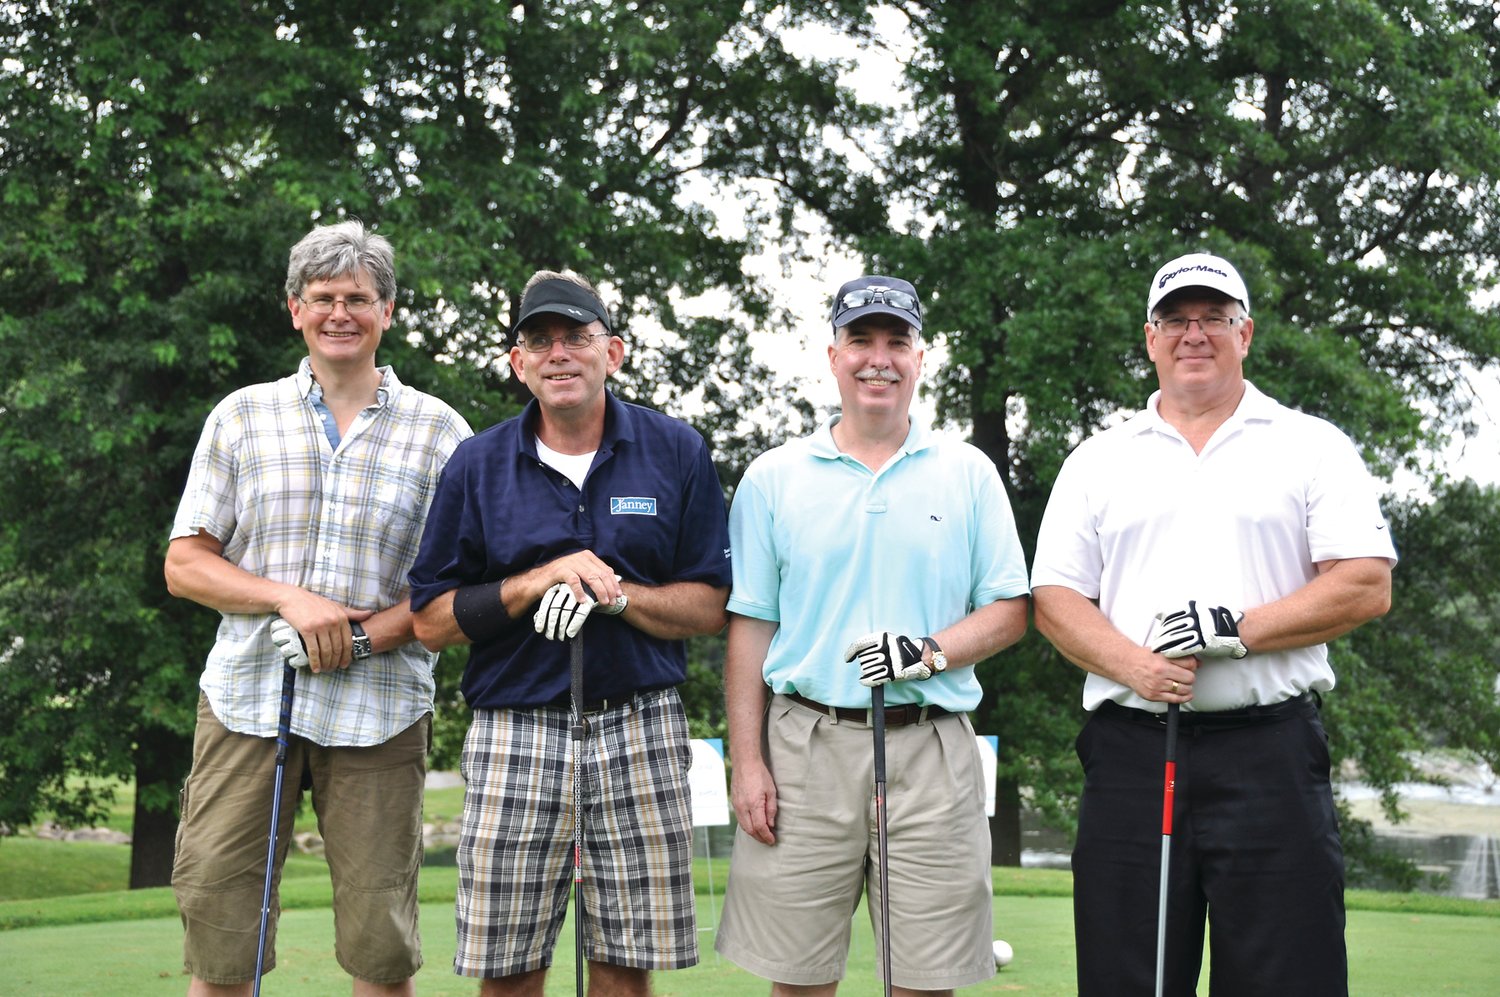 Representing Janney Montgomery Scott at the golf outing were, from left, Chris Haidinger, Ed Sherwood, Bob Weckenman and Frank Weckenman.